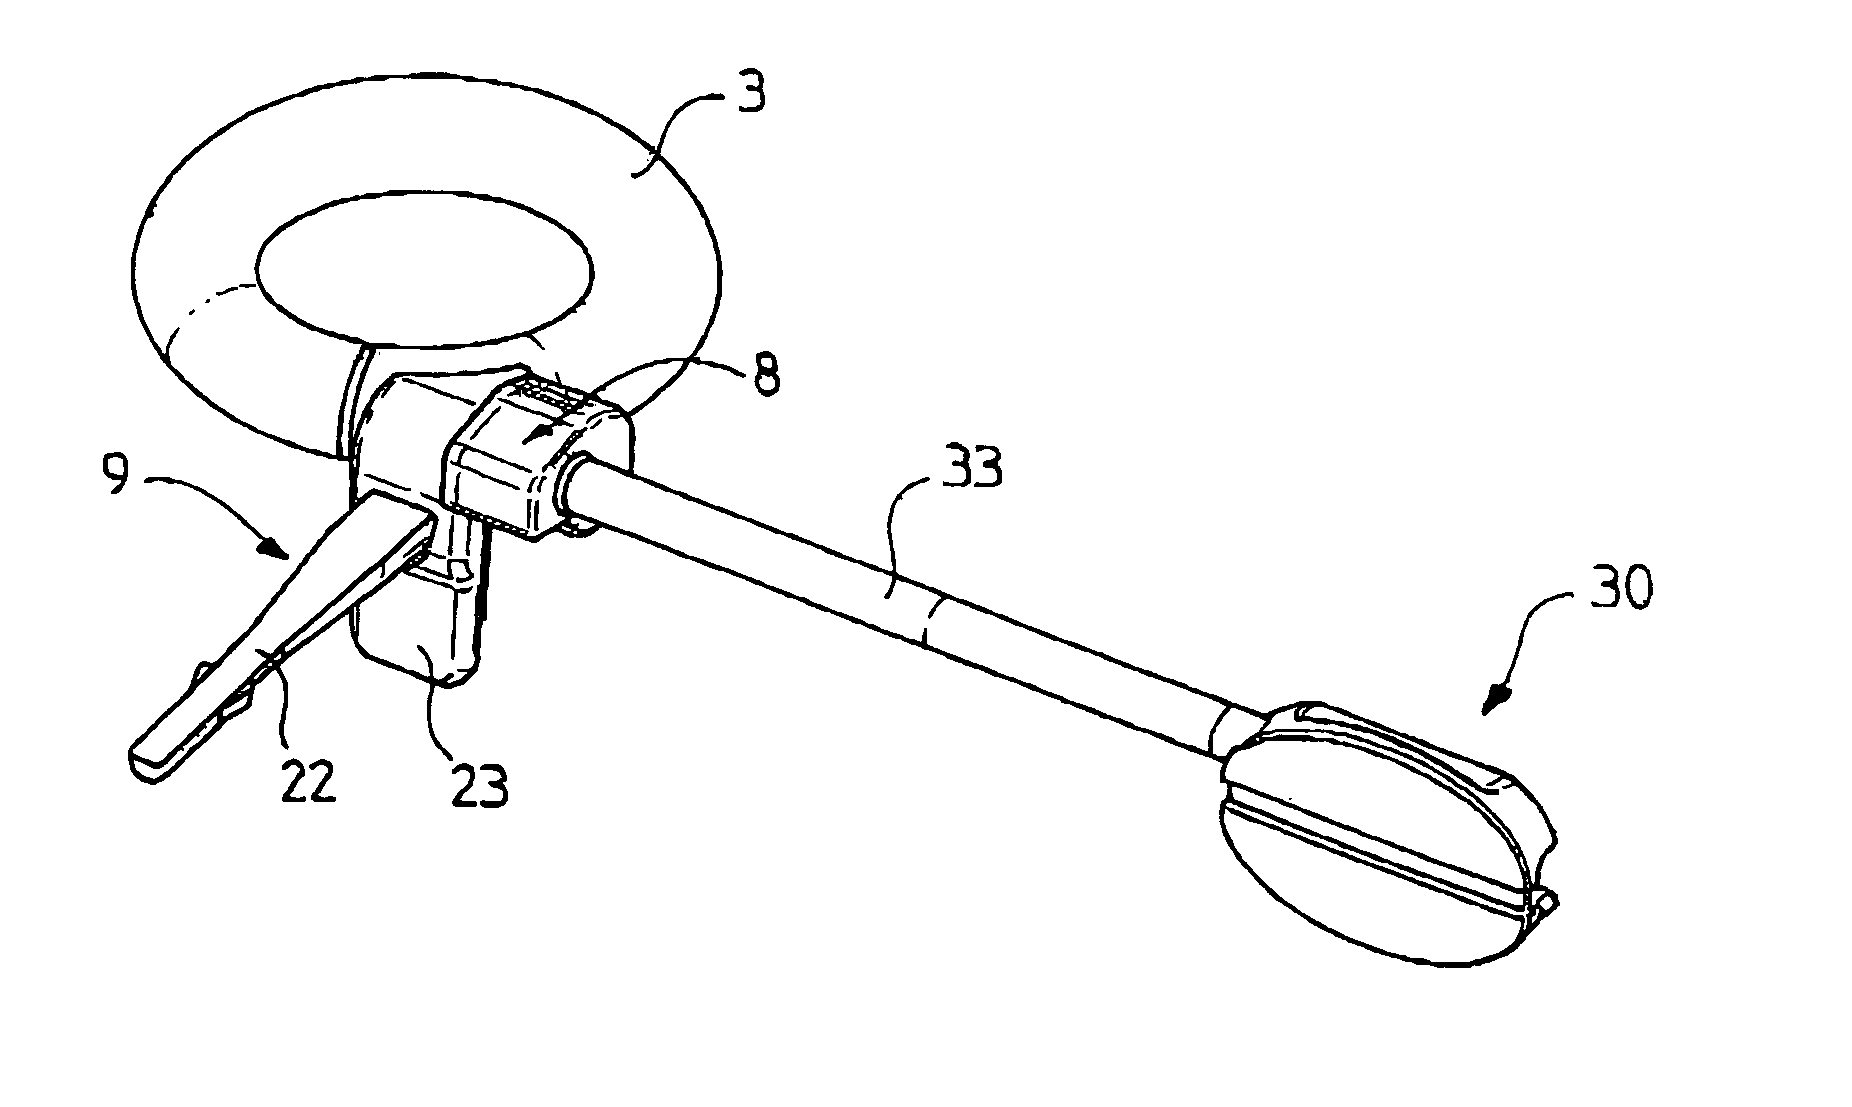 Surgical ring featuring a reversible diameter remote control system